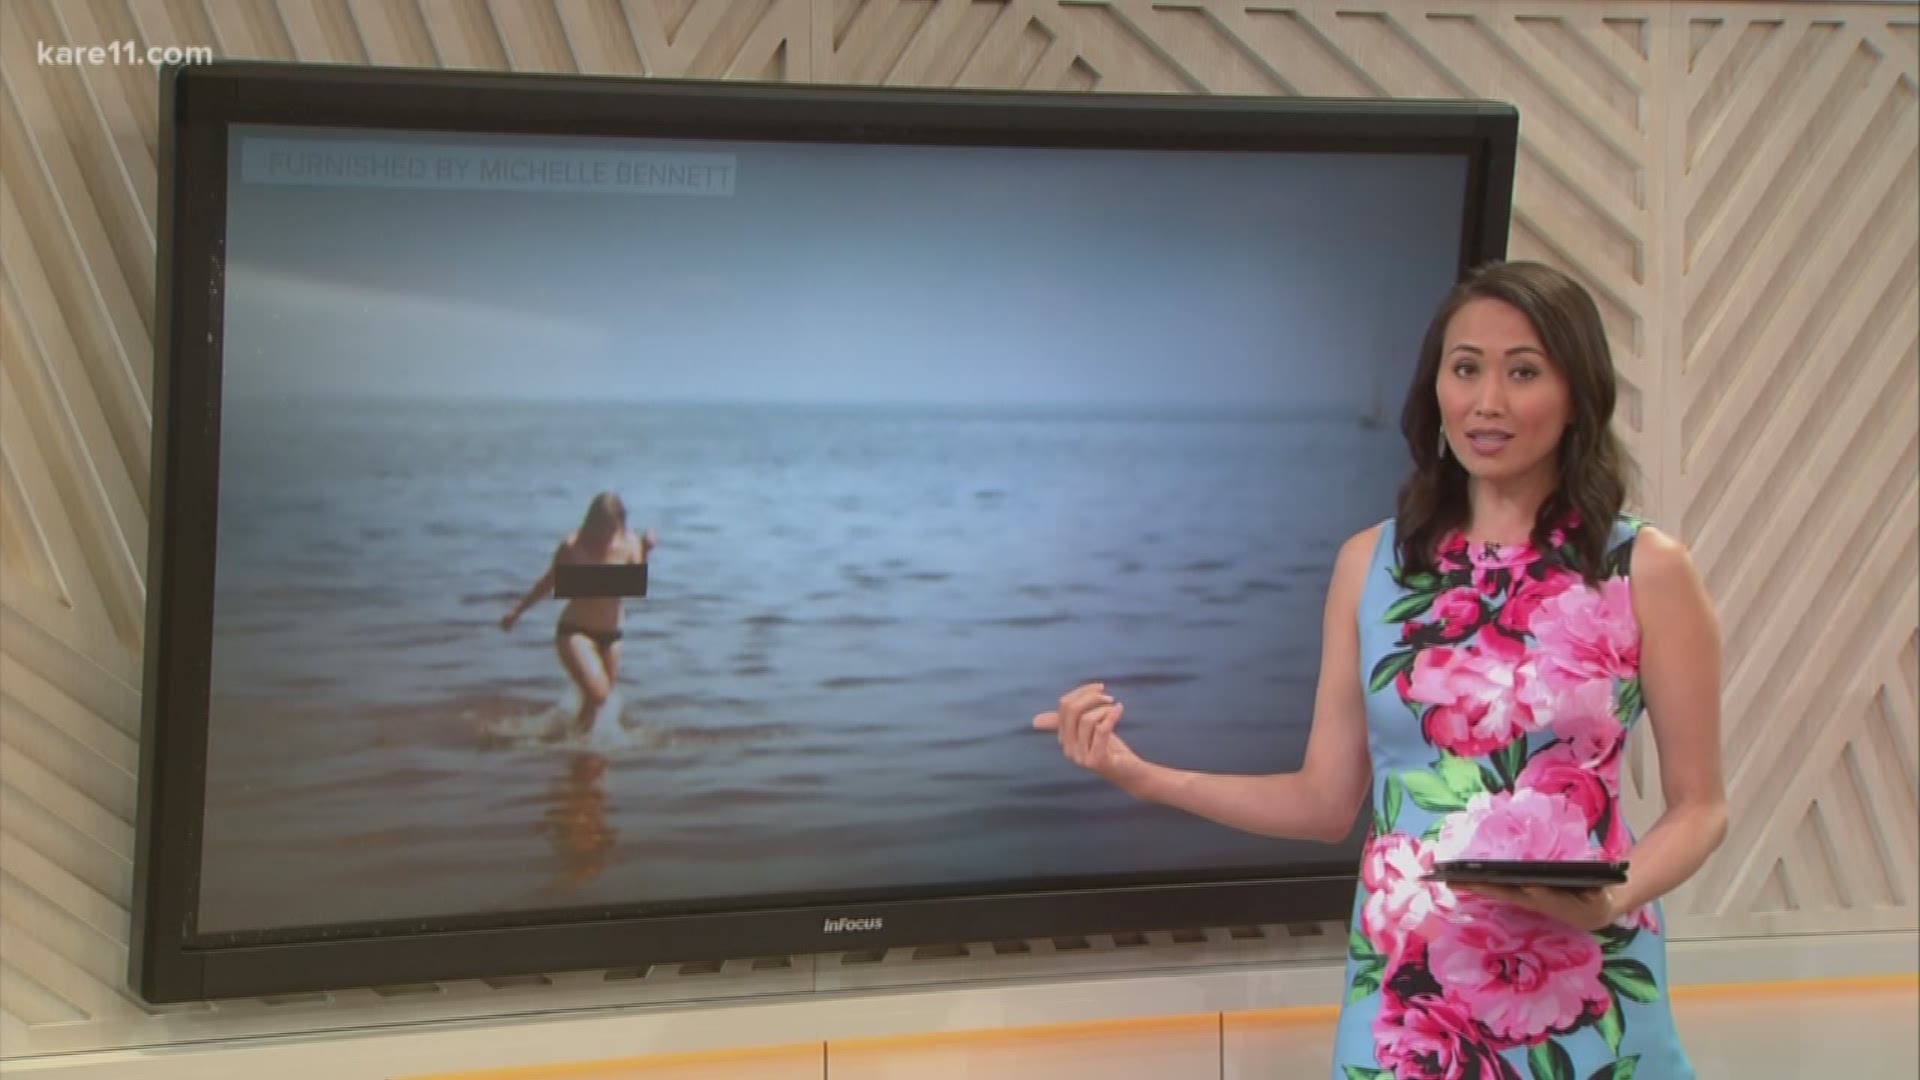 A Duluth woman is taking a stand about her right to go topless on her favorite Lake Superior beach. What's your take?